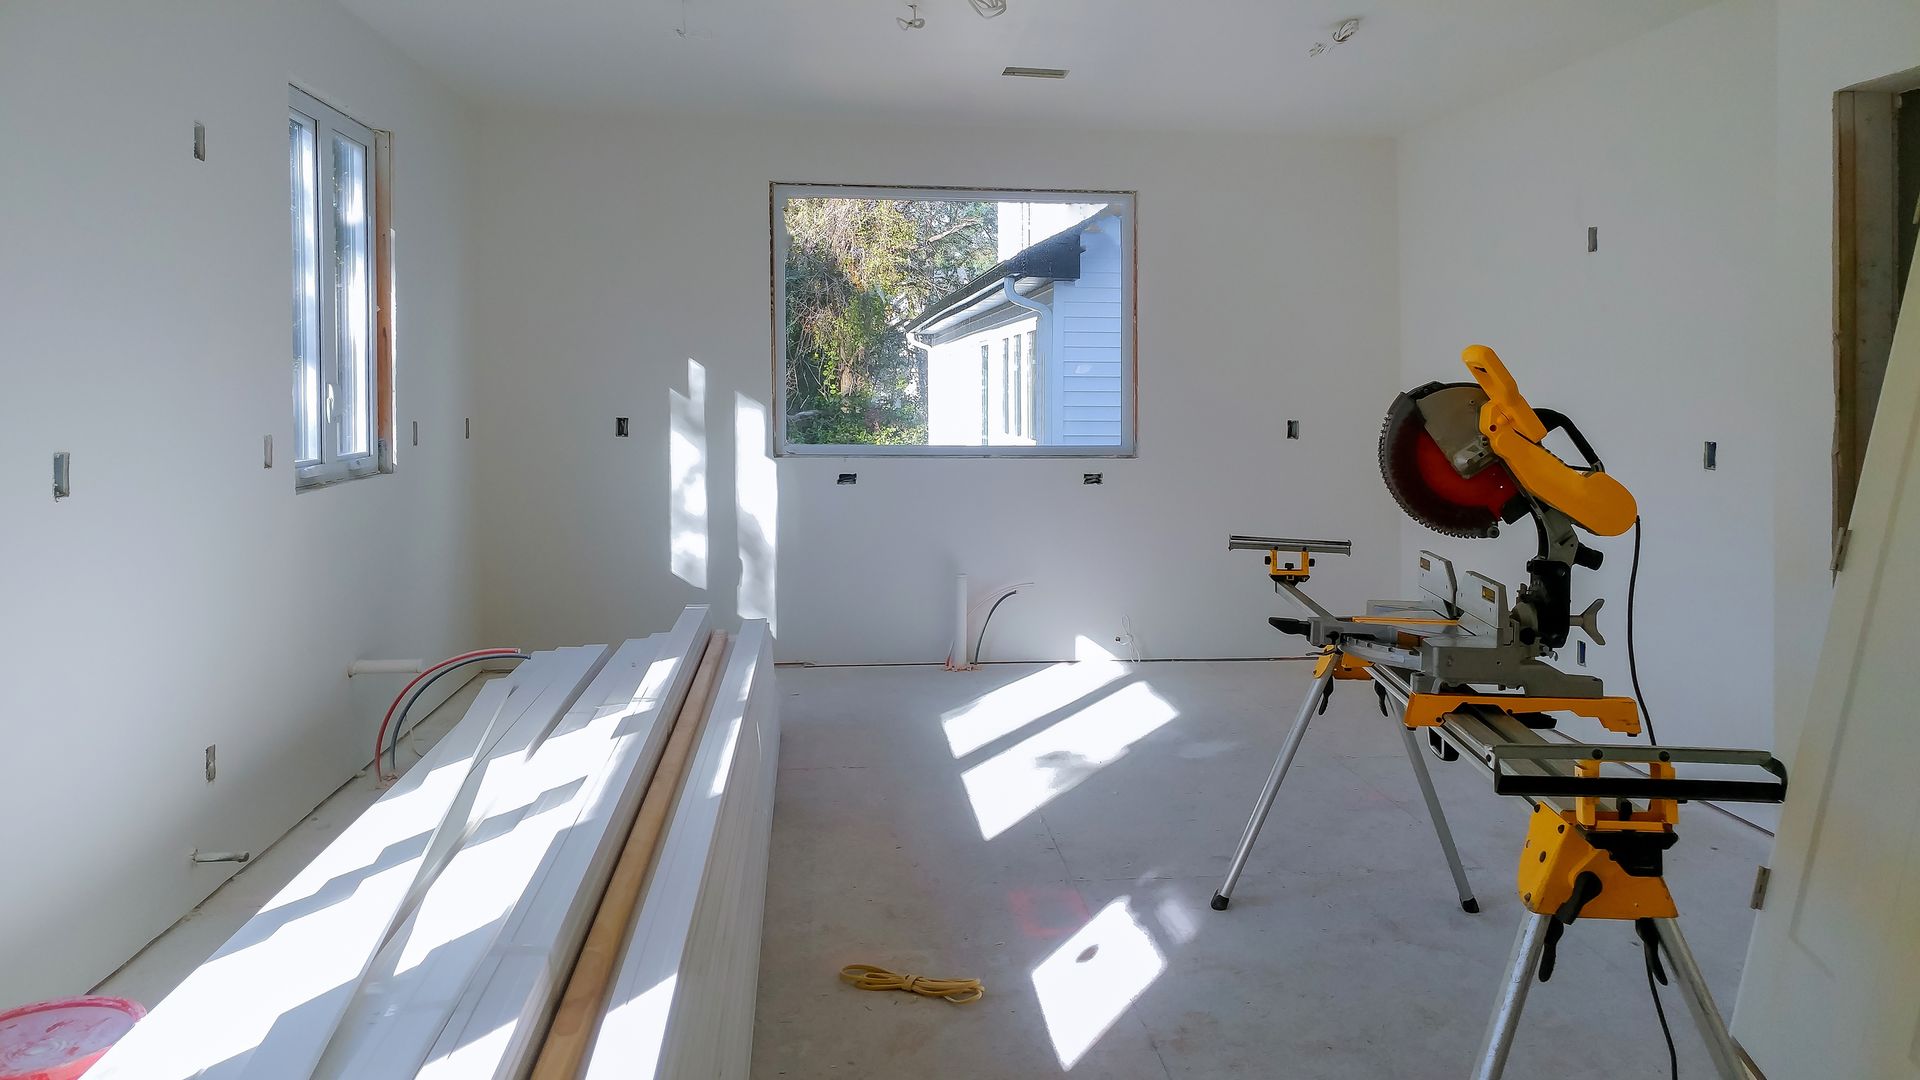 A spacious, well-lit room addition  constructed by Red Beaver Construction.